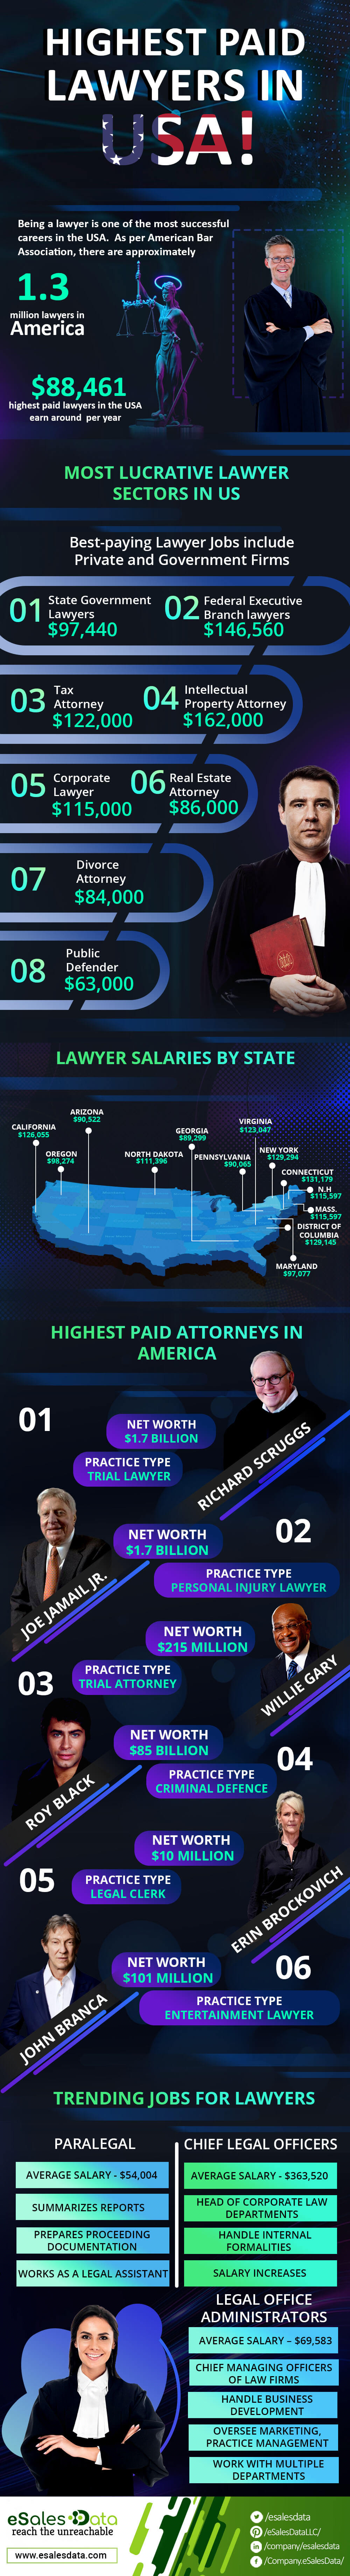 Highest Paid Lawyers in USA